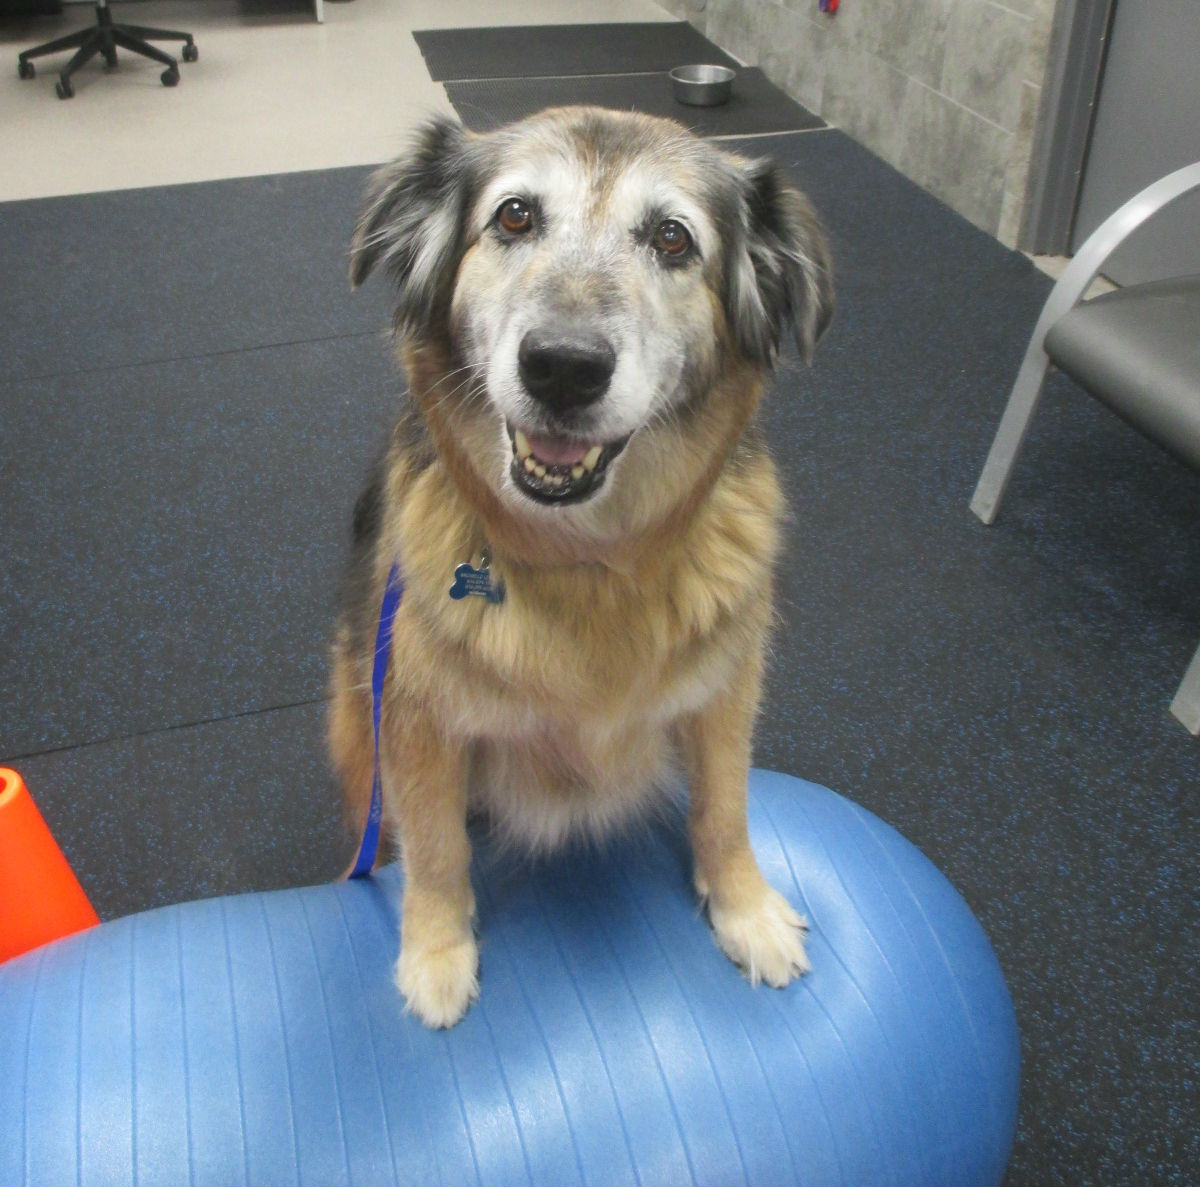 CHFA's veterinary rehabilitation gives senior dogs a new &quot;leash&quot; on life